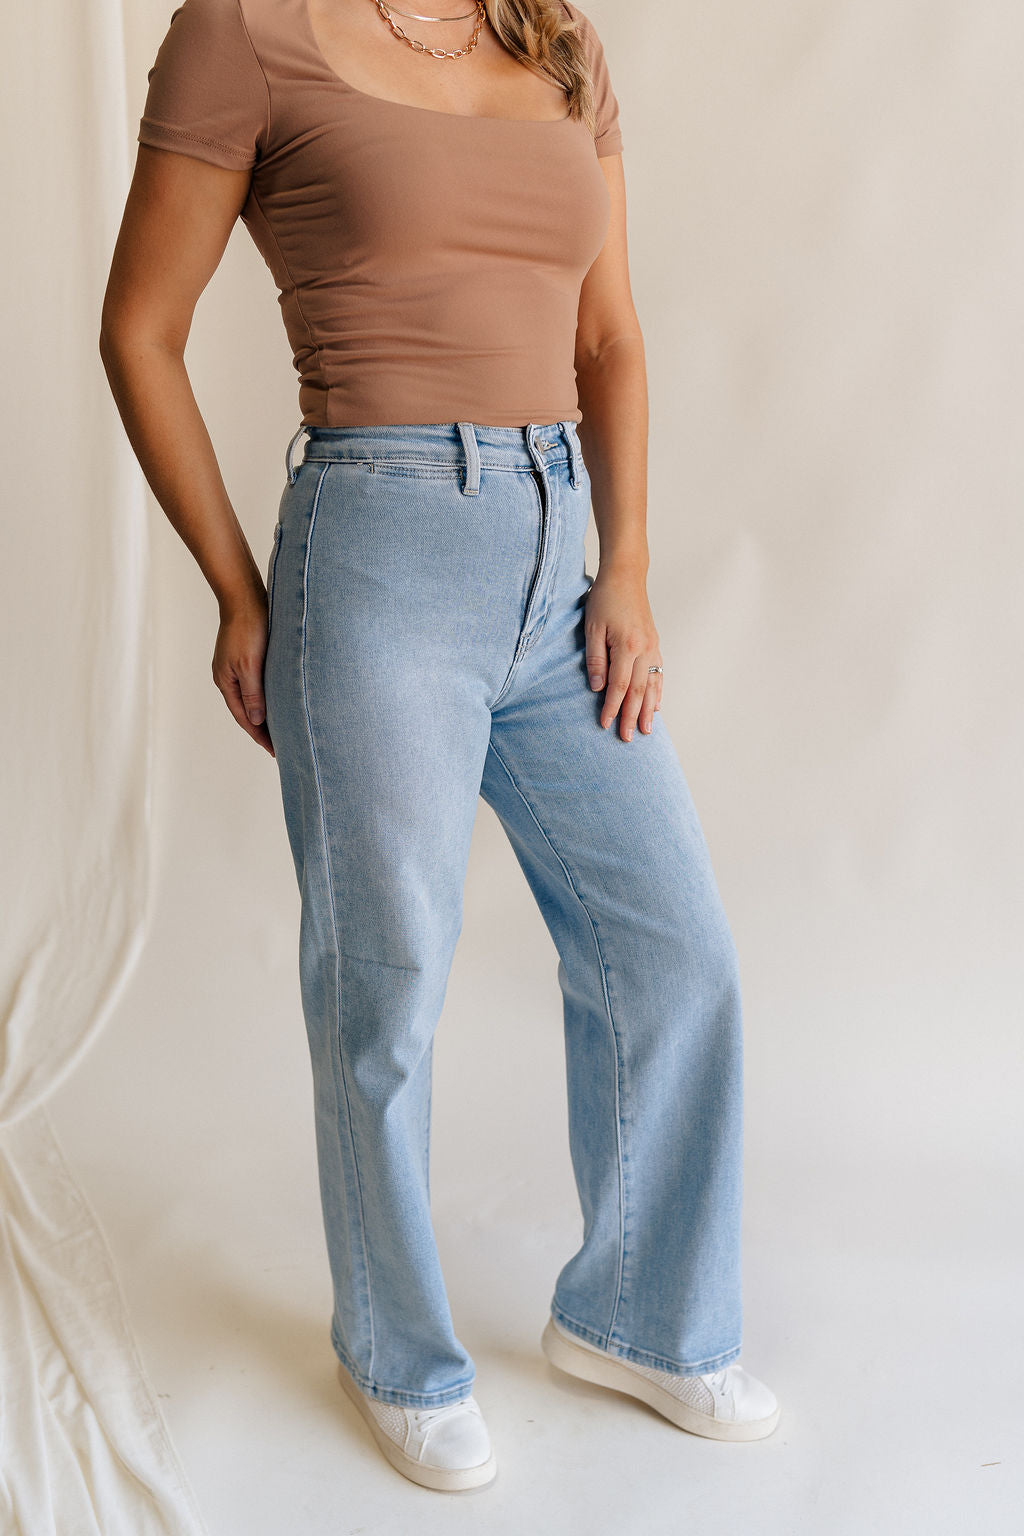 Frontal side view of female model wearing the Stevie Light Denim Wash Wide Leg Jeans which features Light Denim Wash Fabric, Two Front Pockets, Two Back Pockets, Front Zipper with Button Closure, Belt Loops and Wide Pant Legs